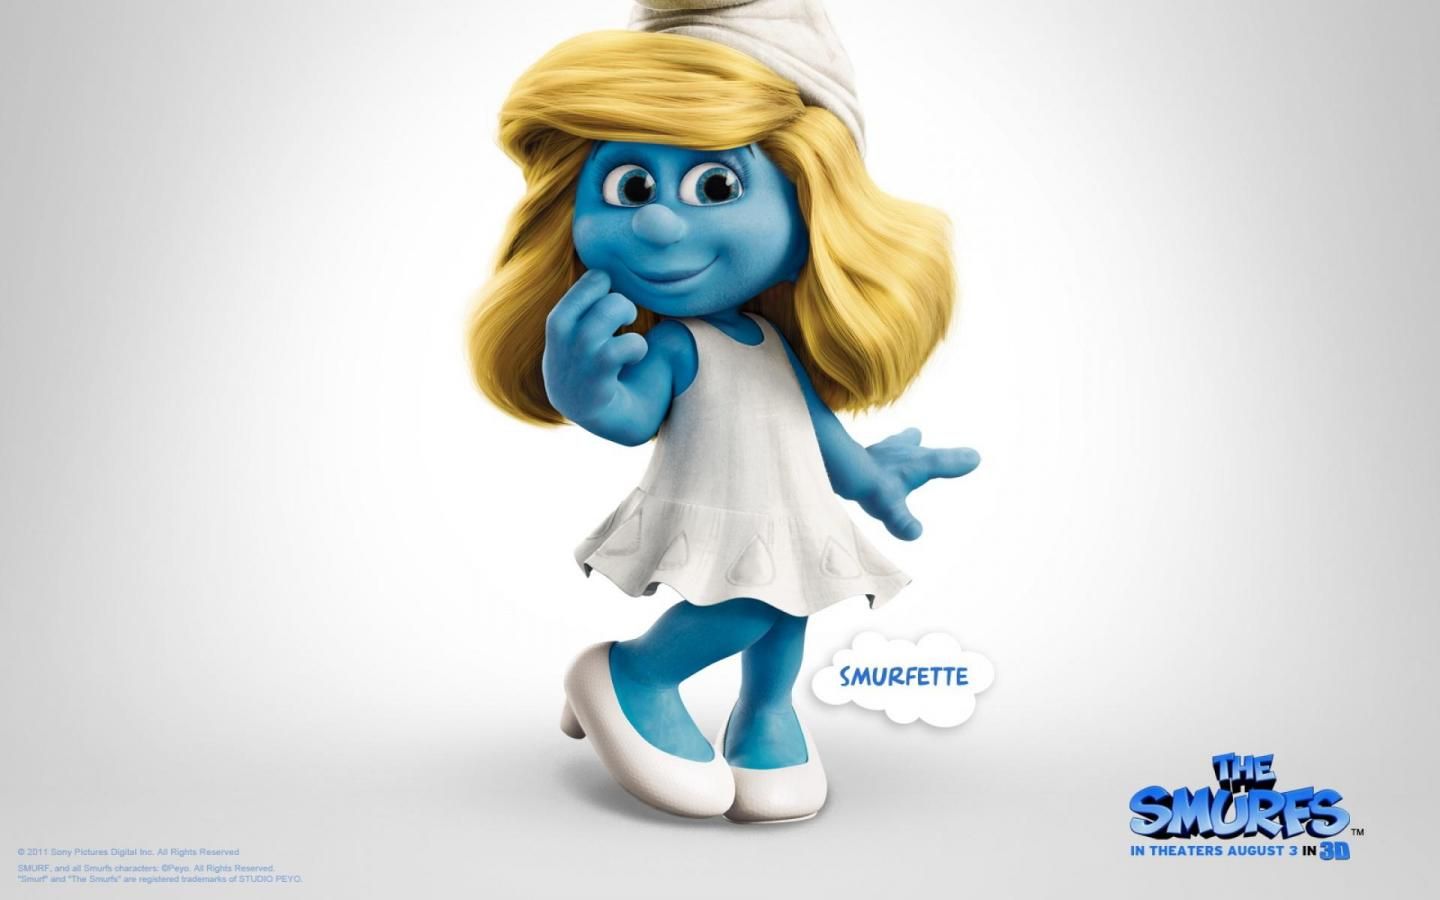 Smurfs pictures to download Wallpapers - Free smurfs pictures to